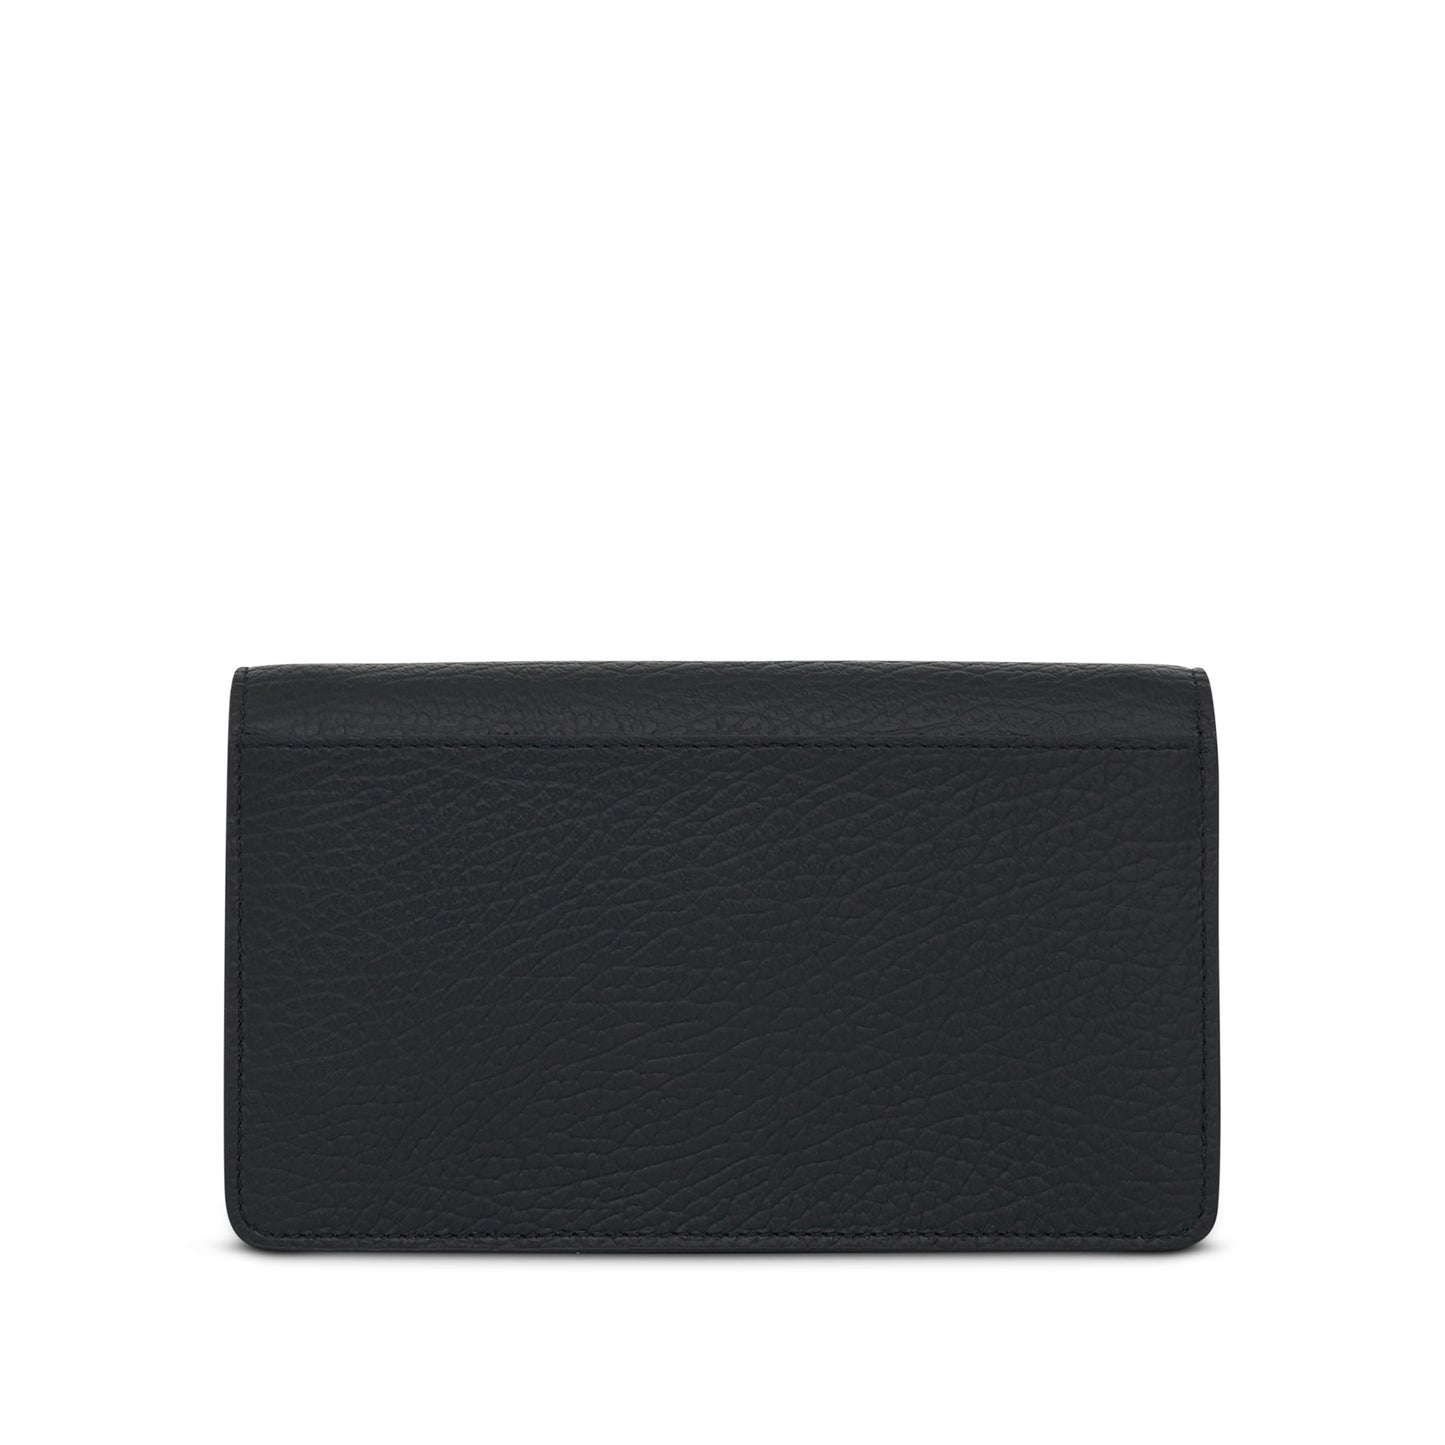 Four Stitches Chain Wallet in Black